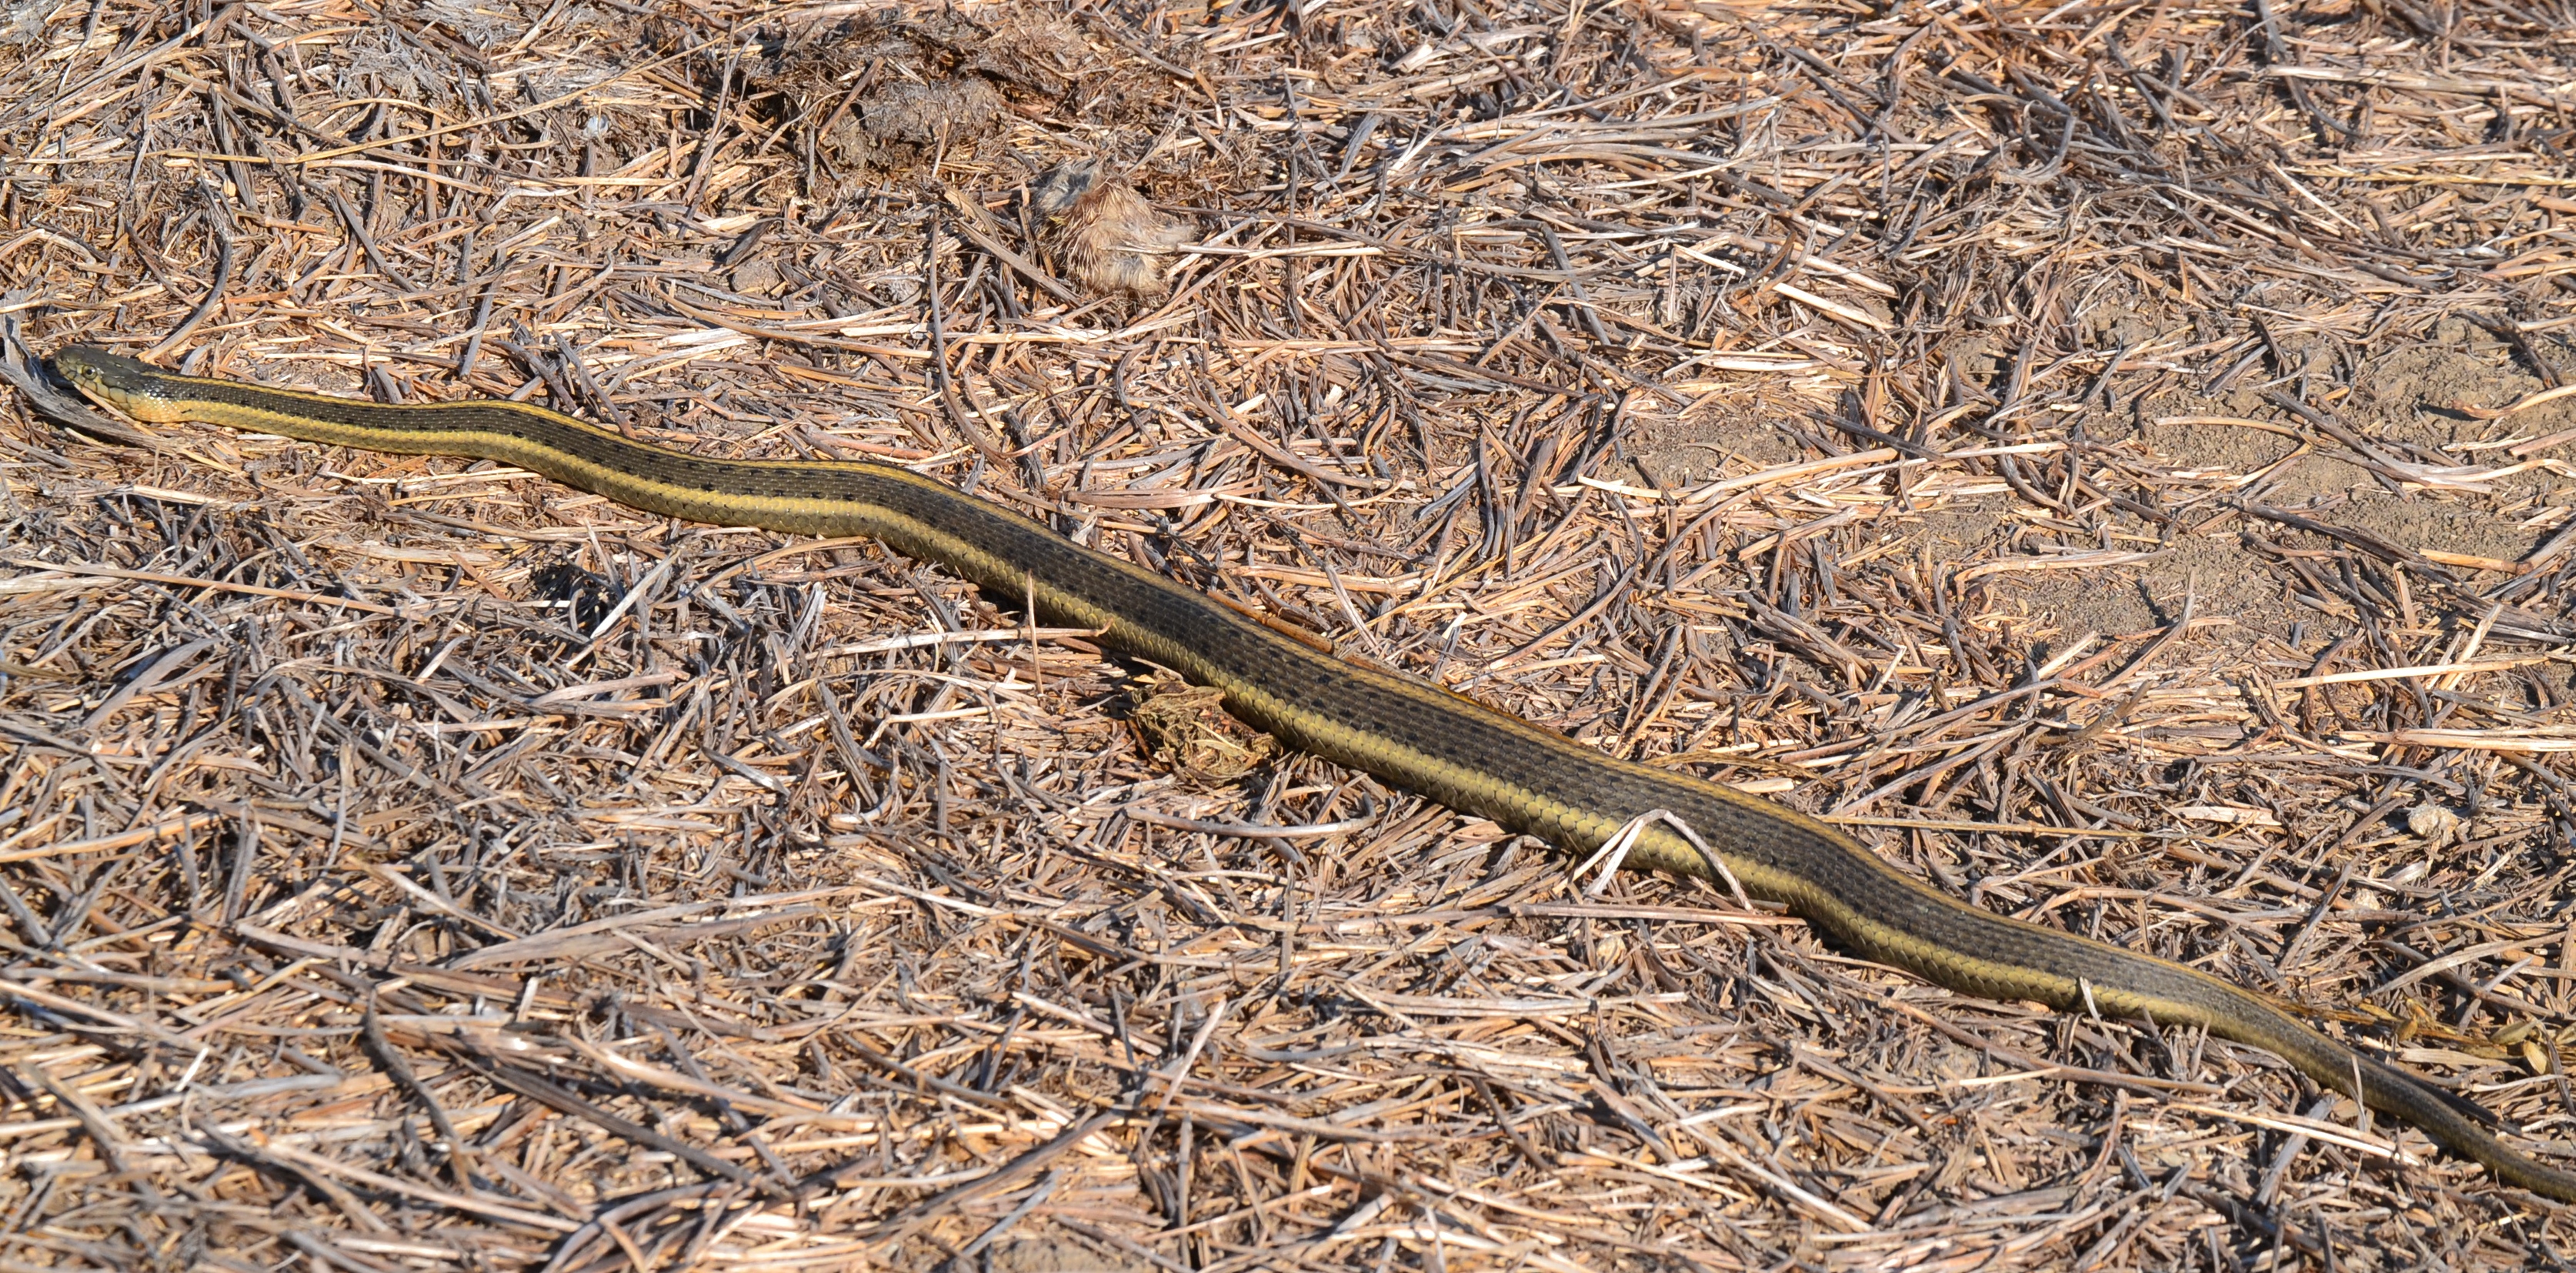 a pregnant Giant garter snake outstretched and laying amongst twigs in the dirt